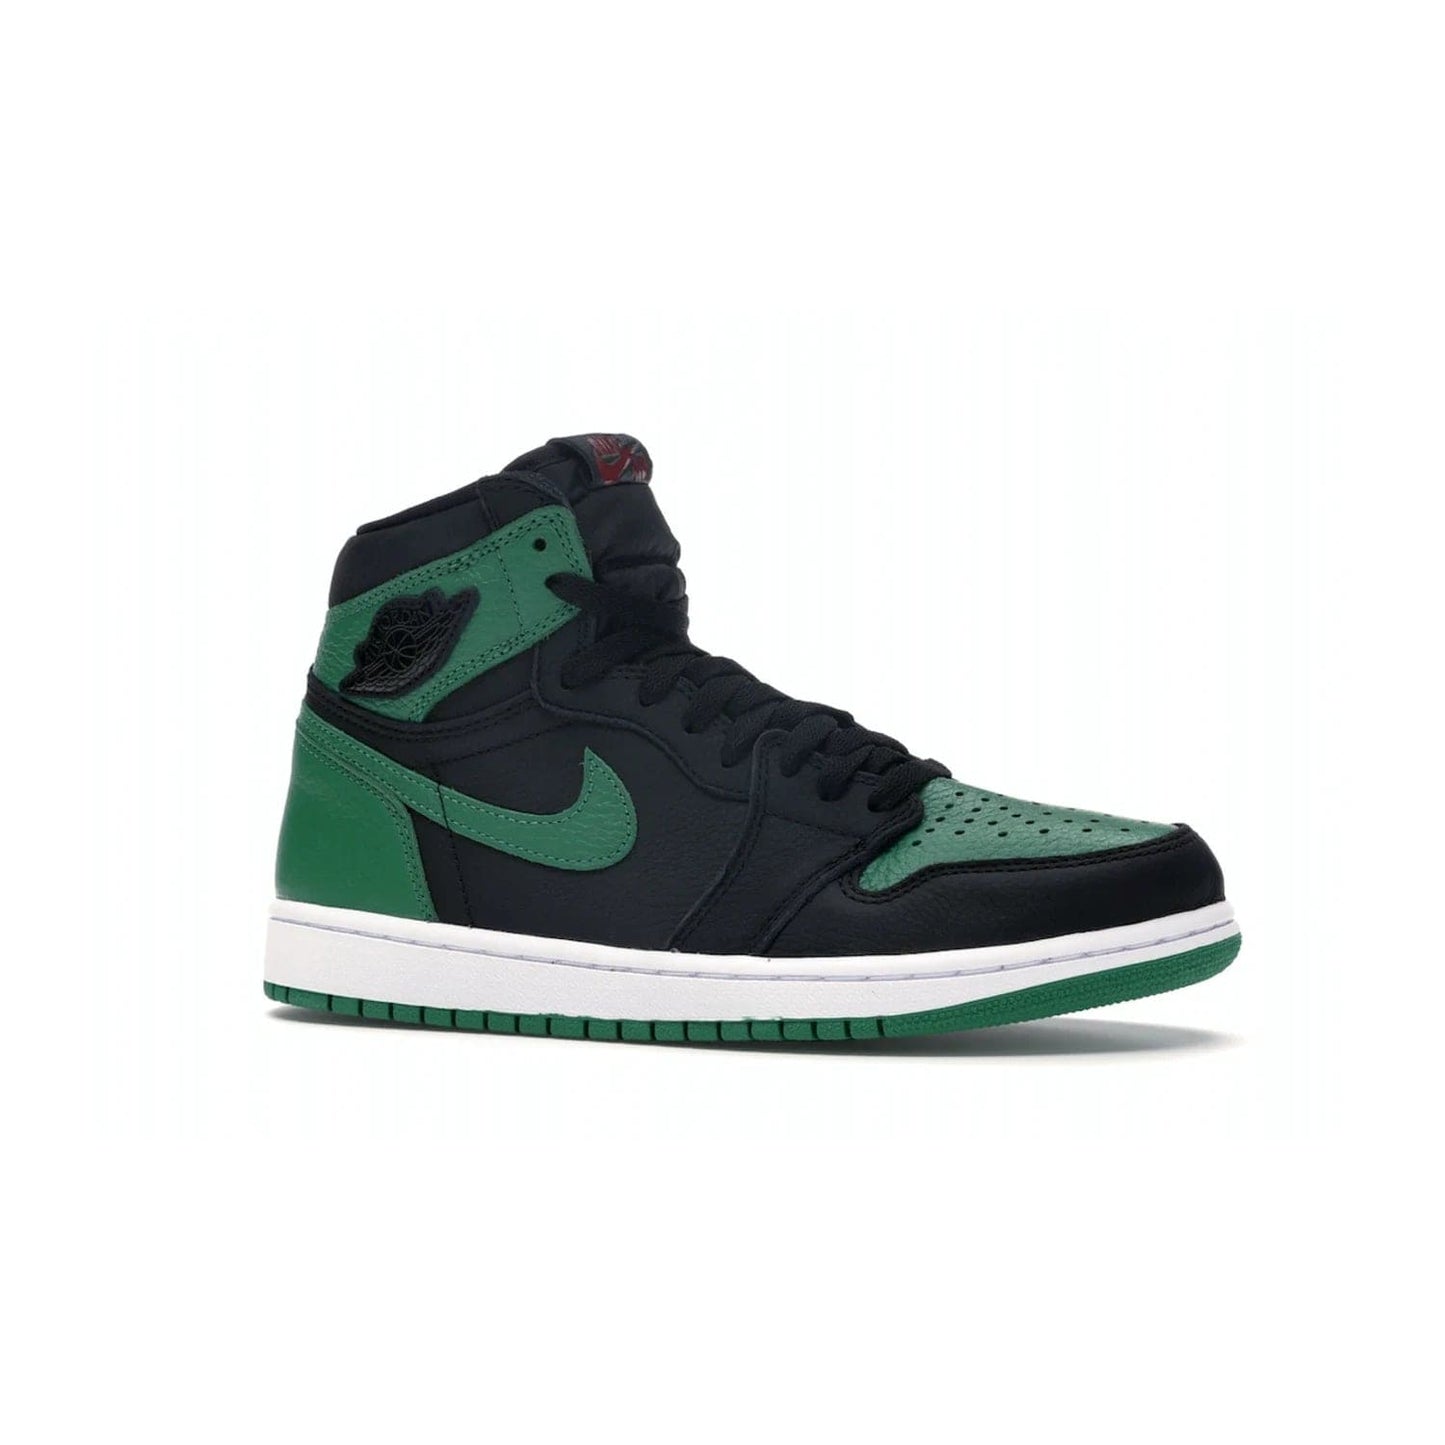 Jordan 1 Retro High Pine Green Black - Image 3 - Only at www.BallersClubKickz.com - Step into fresh style with the Jordan 1 Retro High Pine Green Black. Combining a black tumbled leather upper with green leather overlays, this sneaker features a Gym Red embroidered tongue tag, sail midsole, and pine green outsole for iconic style with a unique twist.